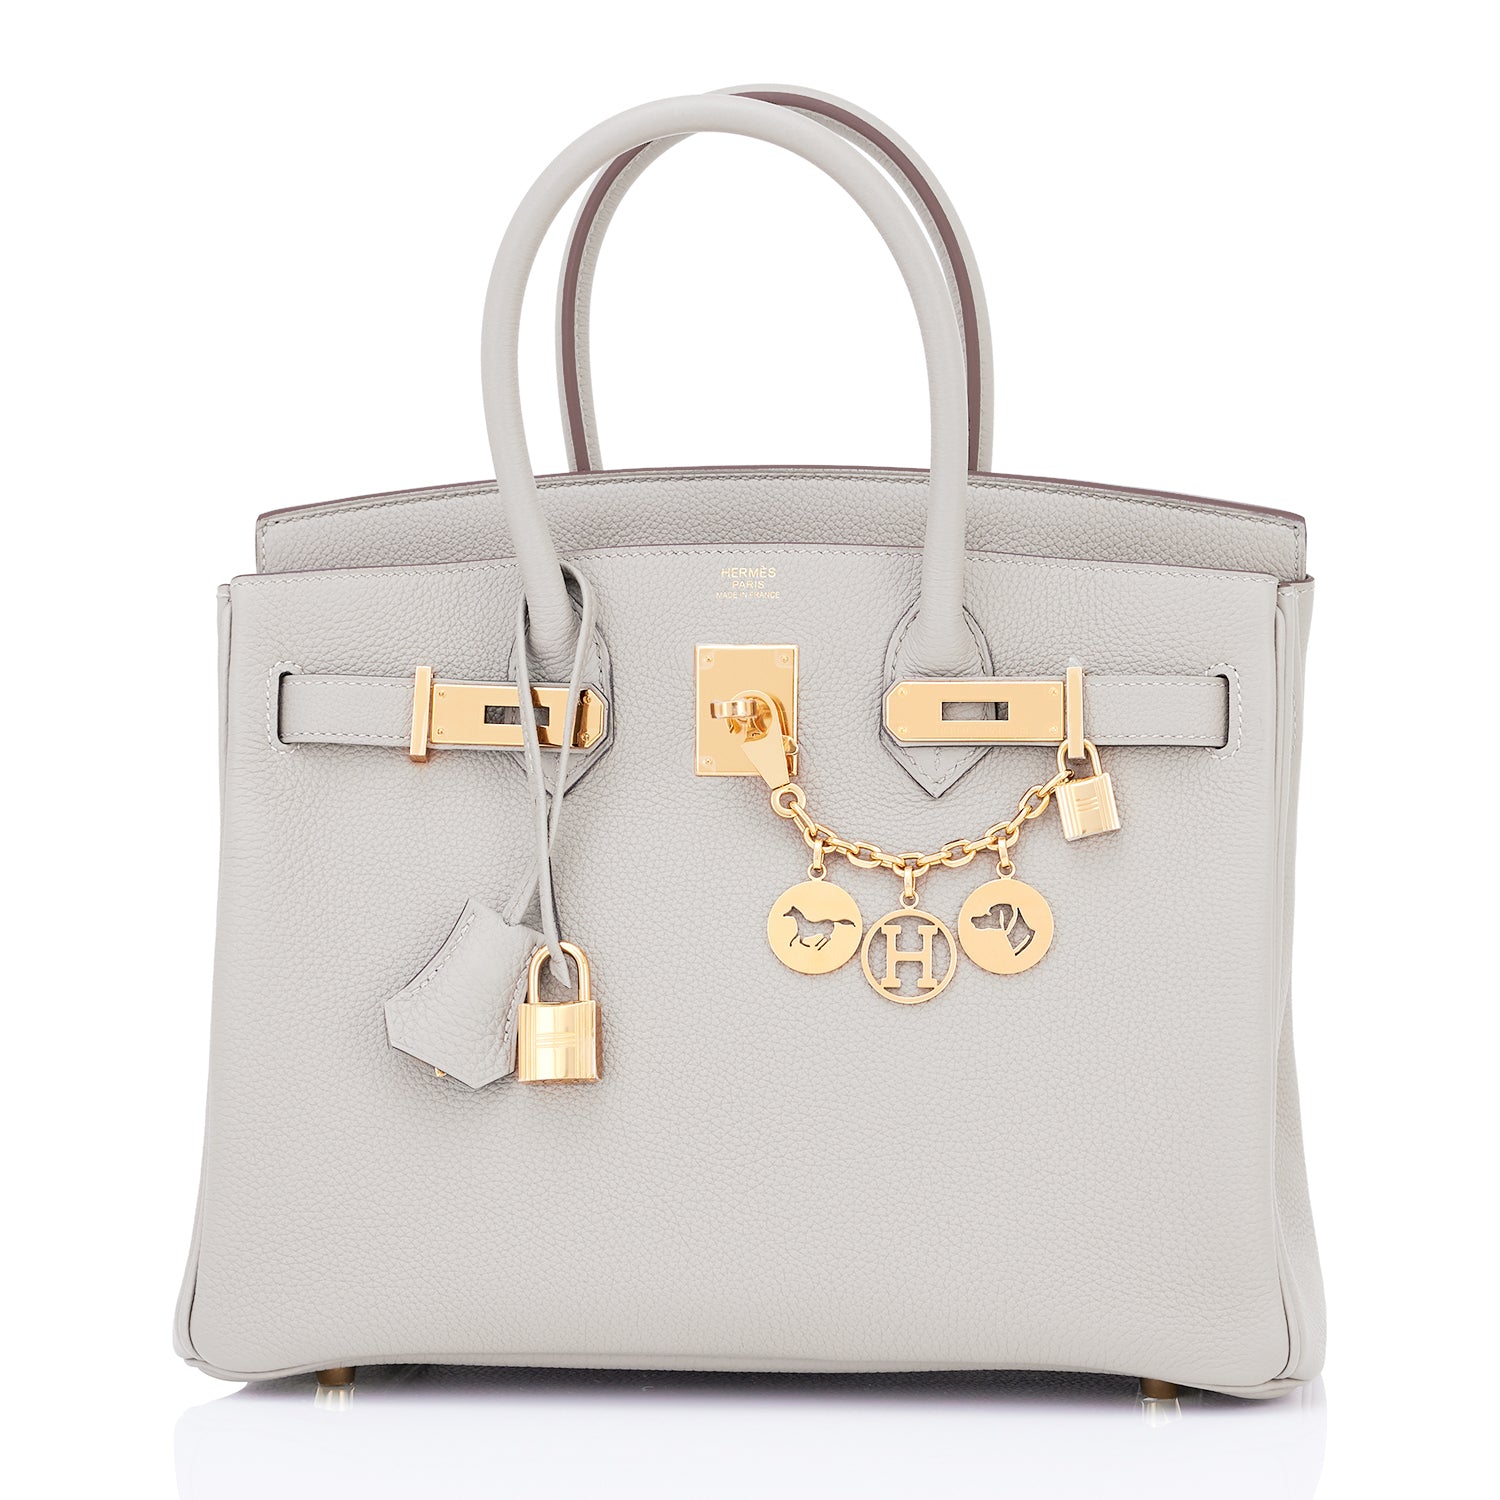 Hermes HSS Taupe and Anemone 32cm Togo Kelly Bag - Chicjoy